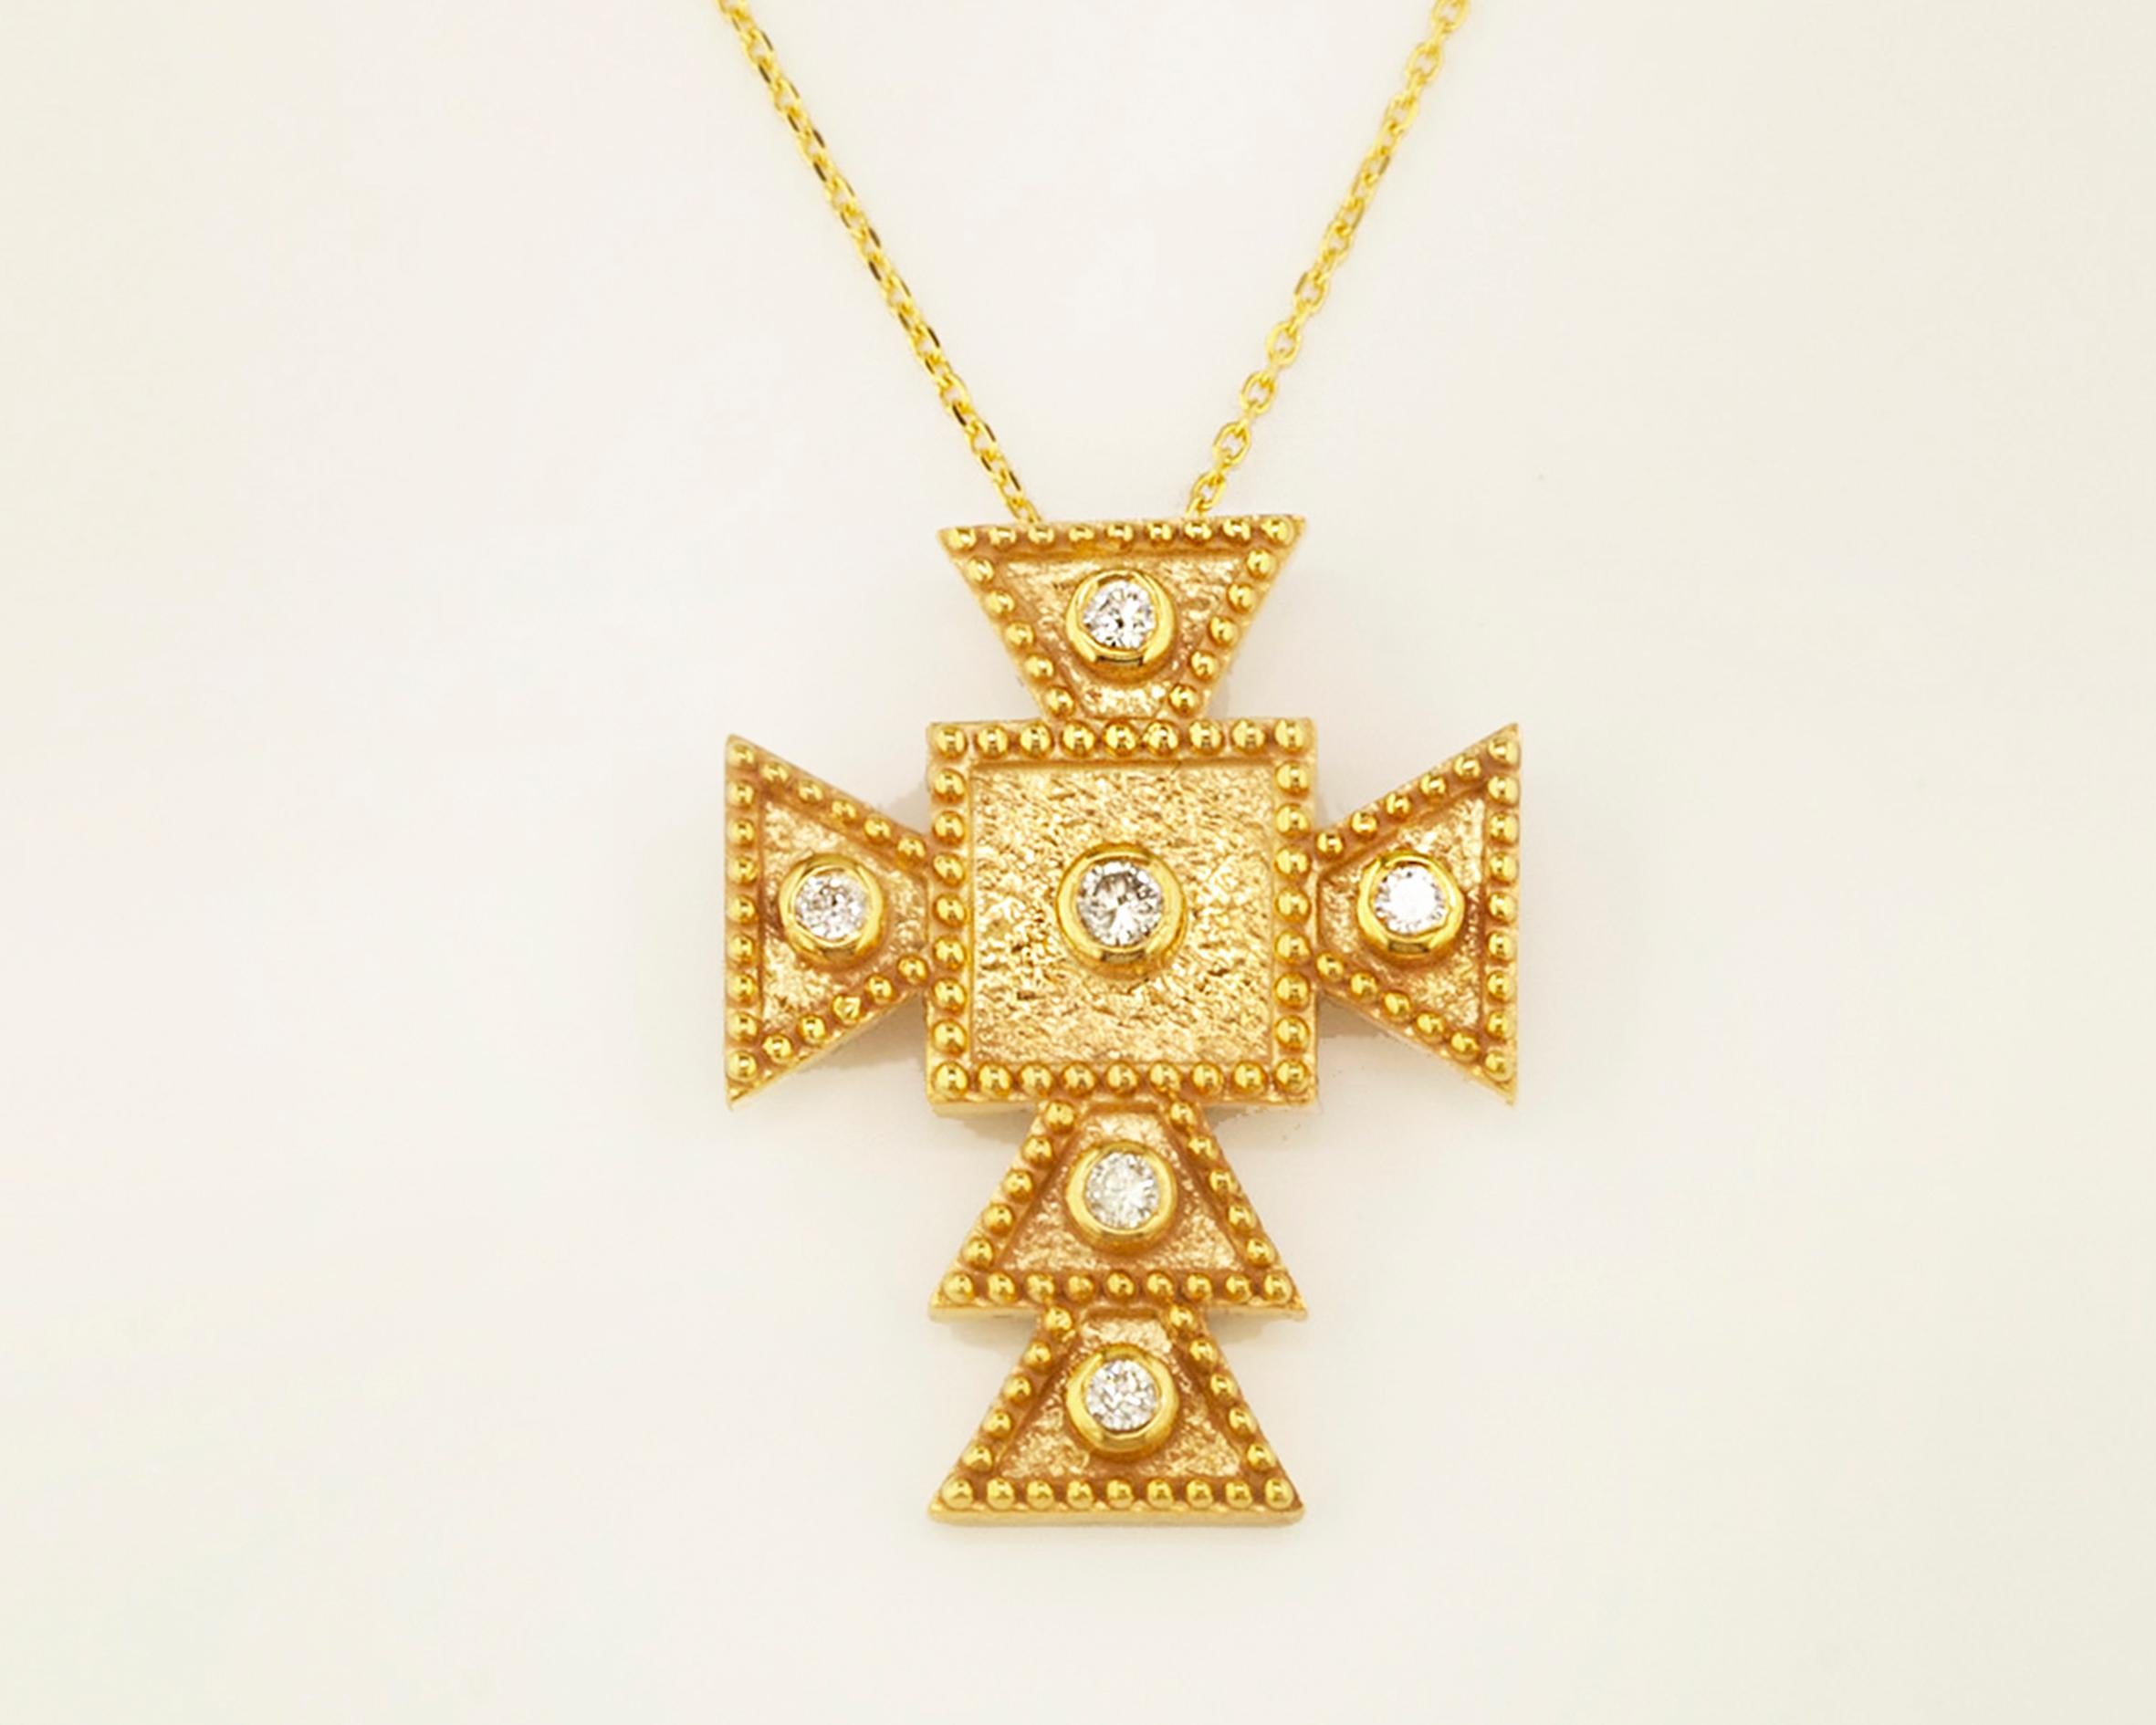 This S.Georgios solid 18 Karat Gold cross pendant Necklace is handmade with microscopically decorated Byzantine-style bead granulation work and finished with a unique velvet background look. This beautiful and distinctive Cross necklace features 6